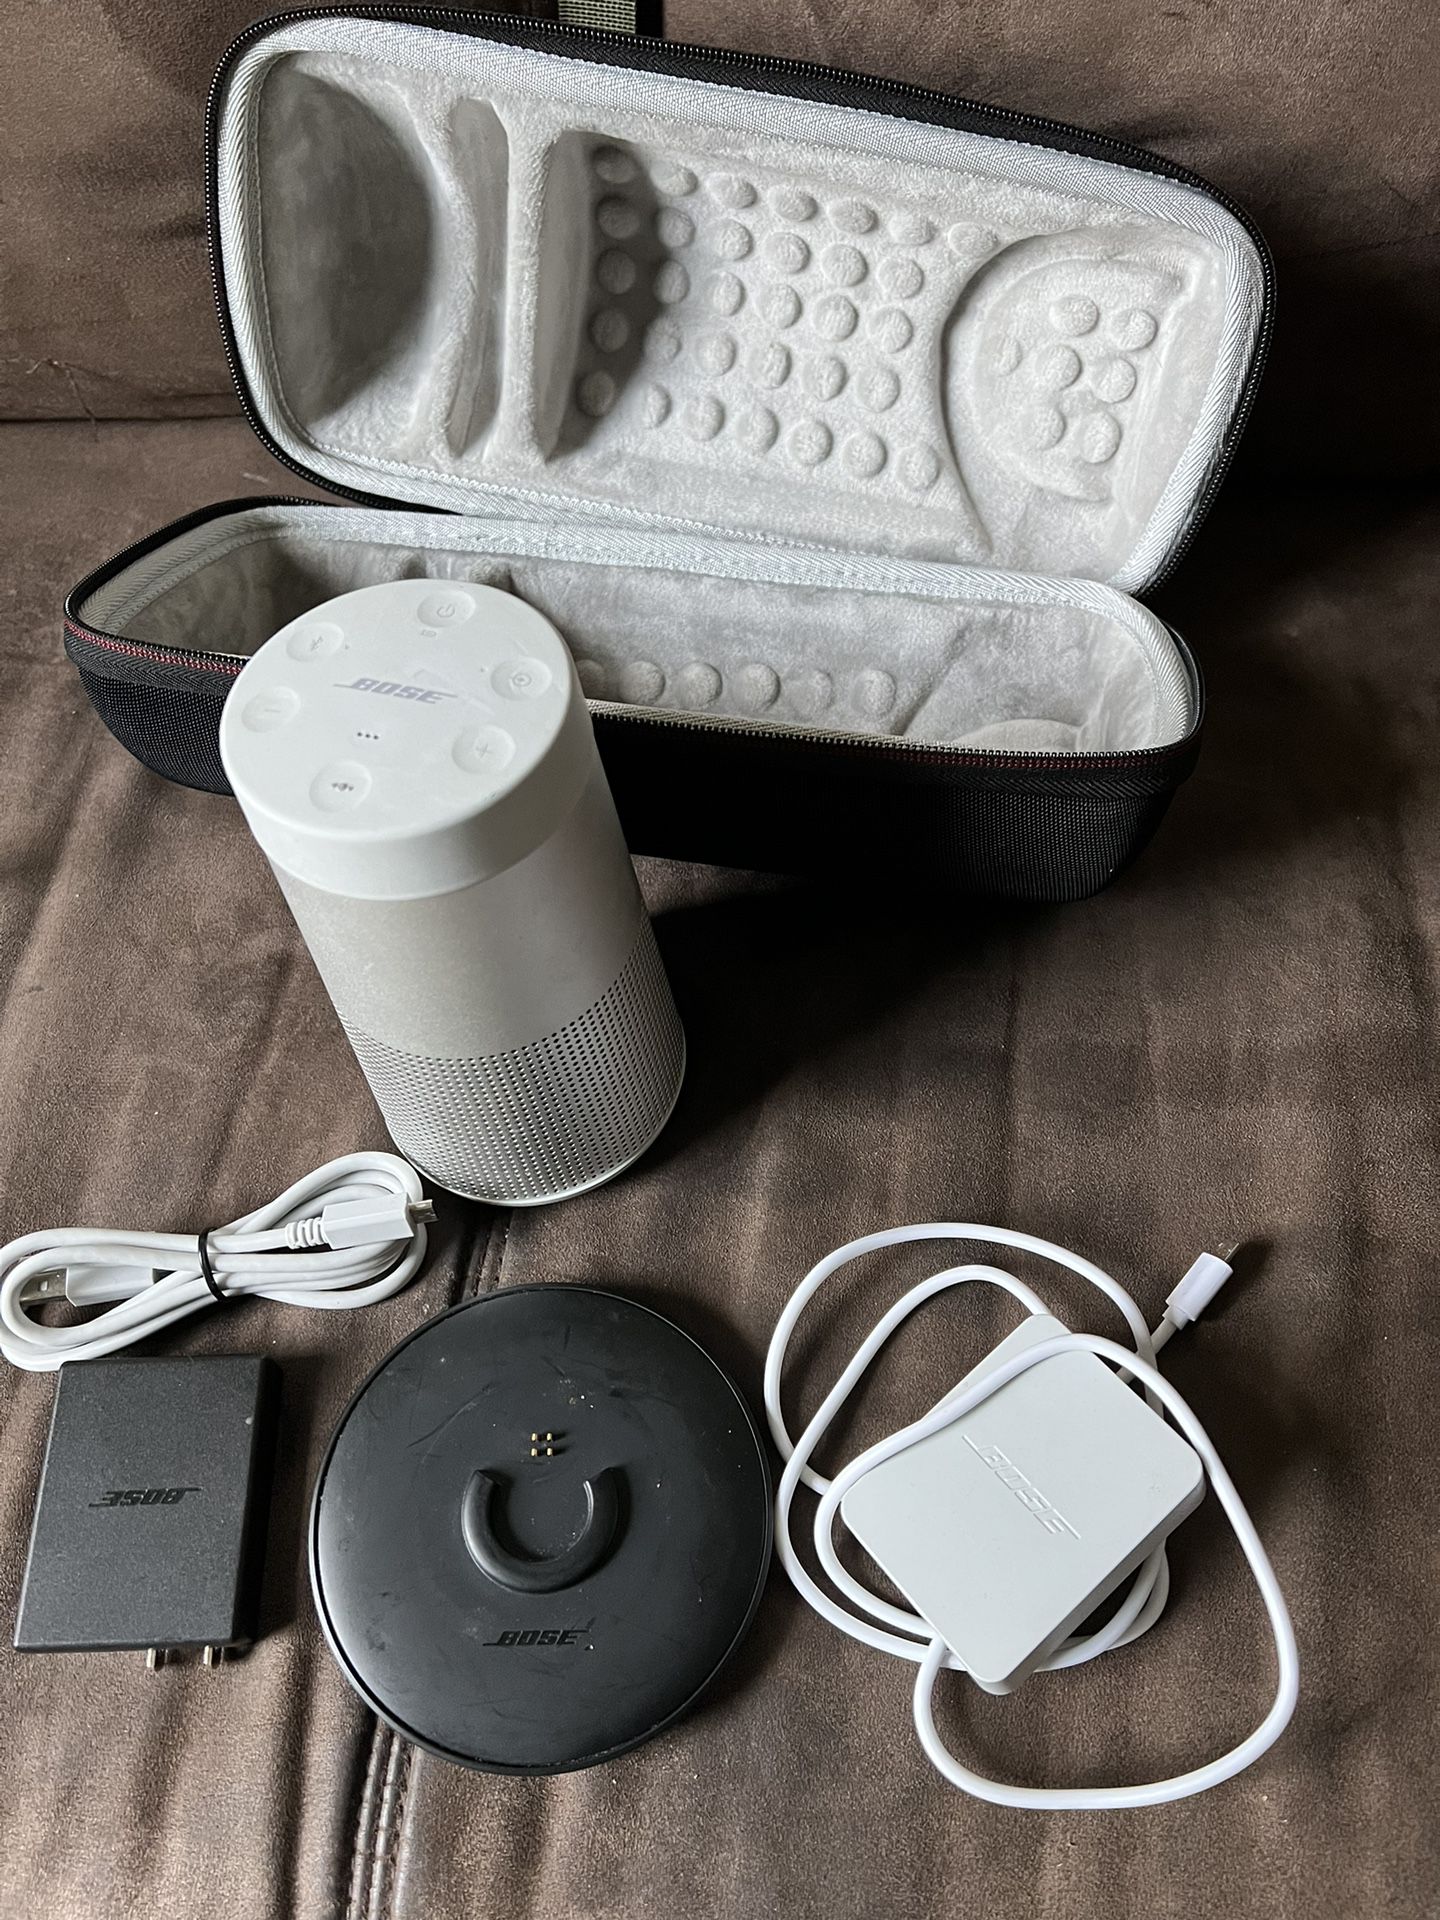 Bose Revolve with Charging Cradle and Carrying Case 